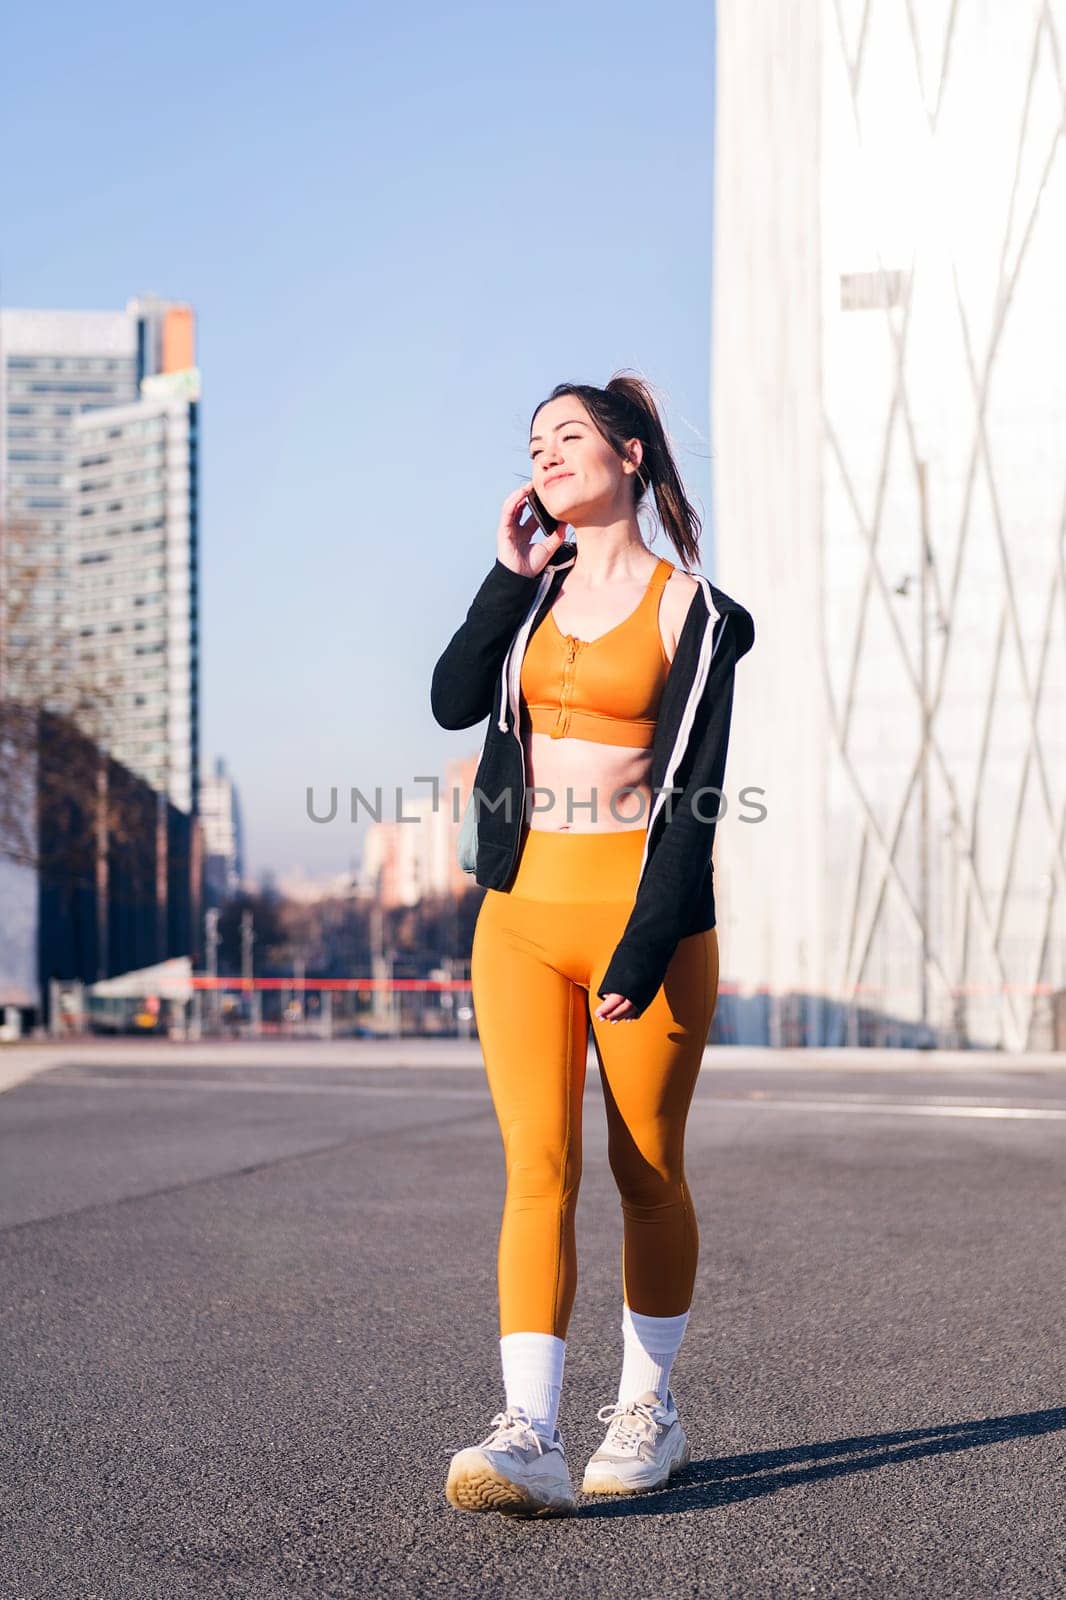 vertical photo of a woman in sports clothes talking by mobile phone outdoors in the city street, concept of technology of communication and urban sport